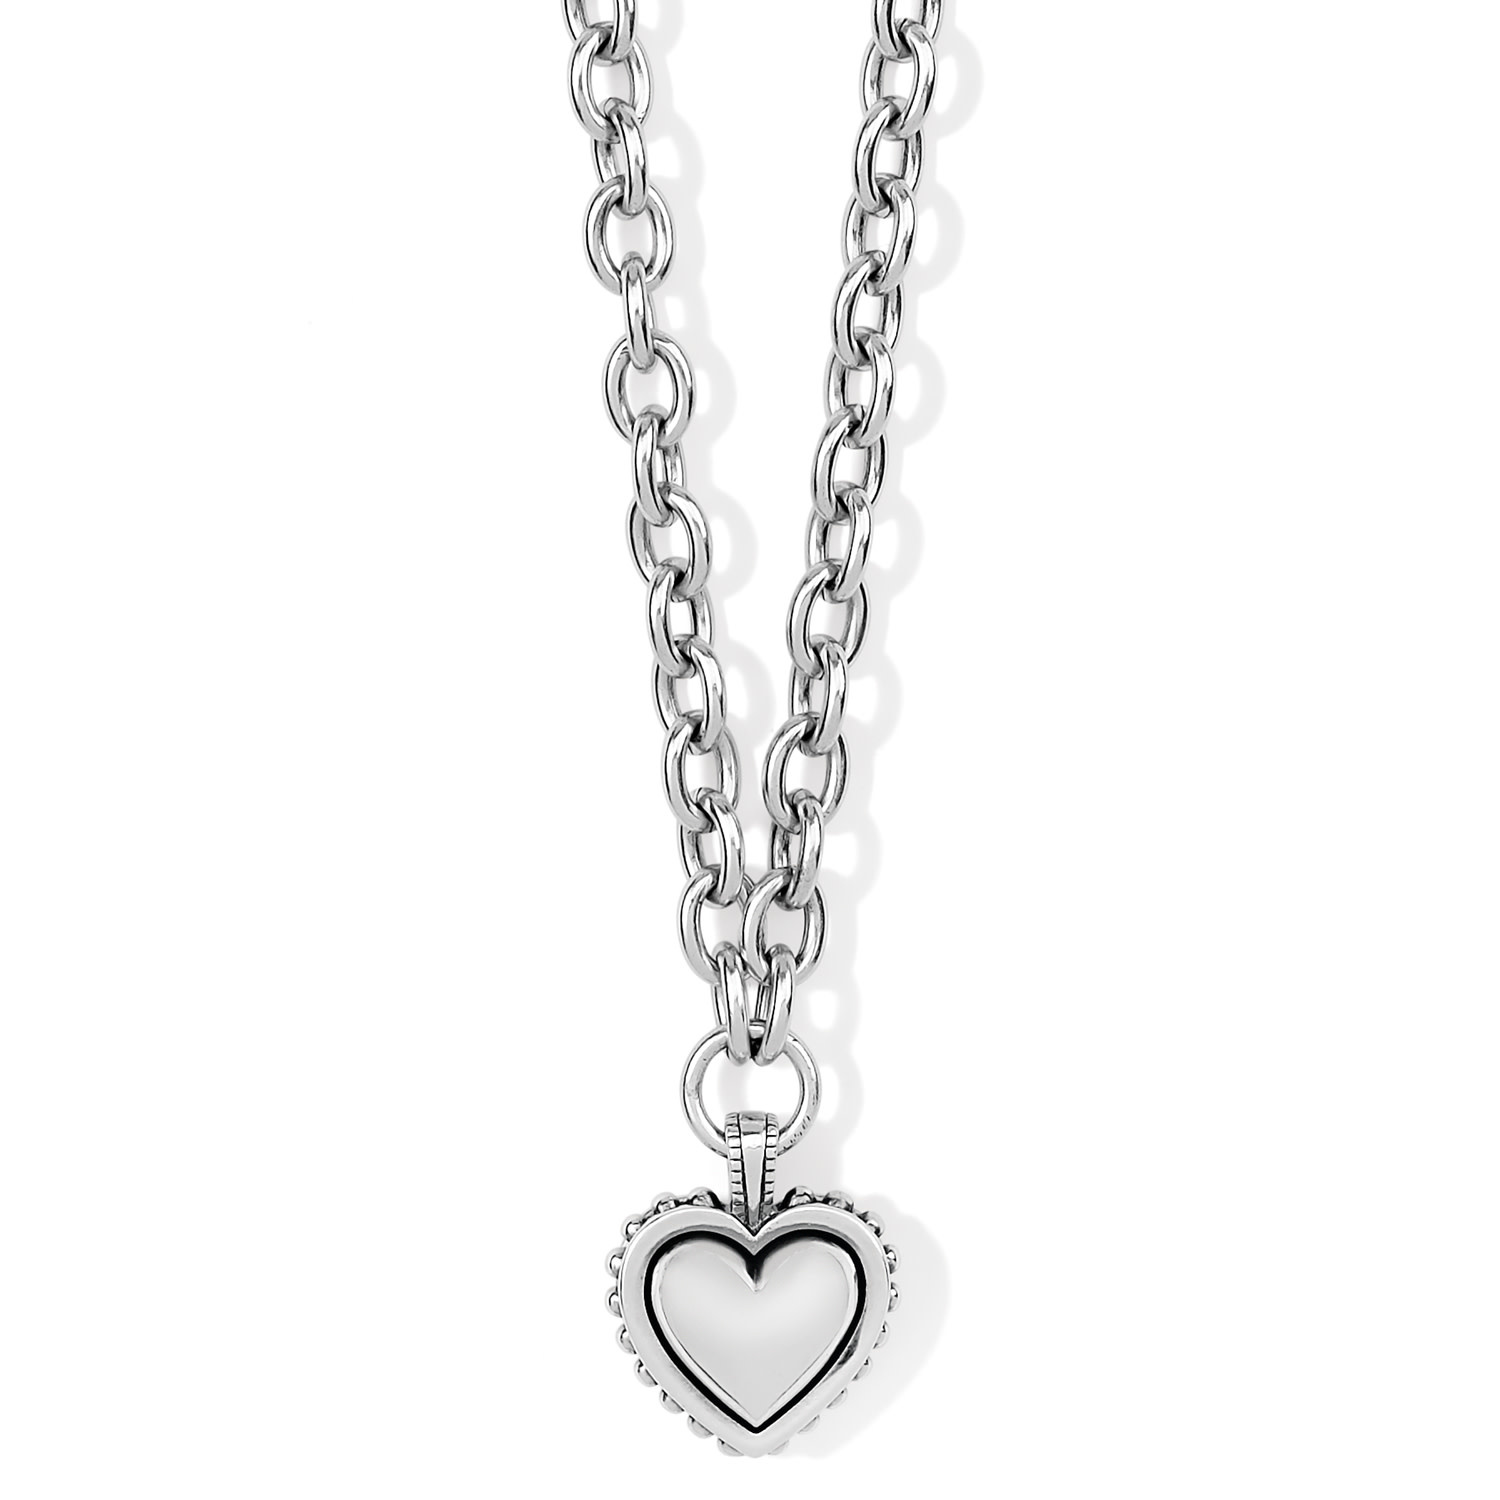 31 Inch Long Brighton Heart Pendant Necklace Silver Tone Classic Romantic  Style - Etsy Israel